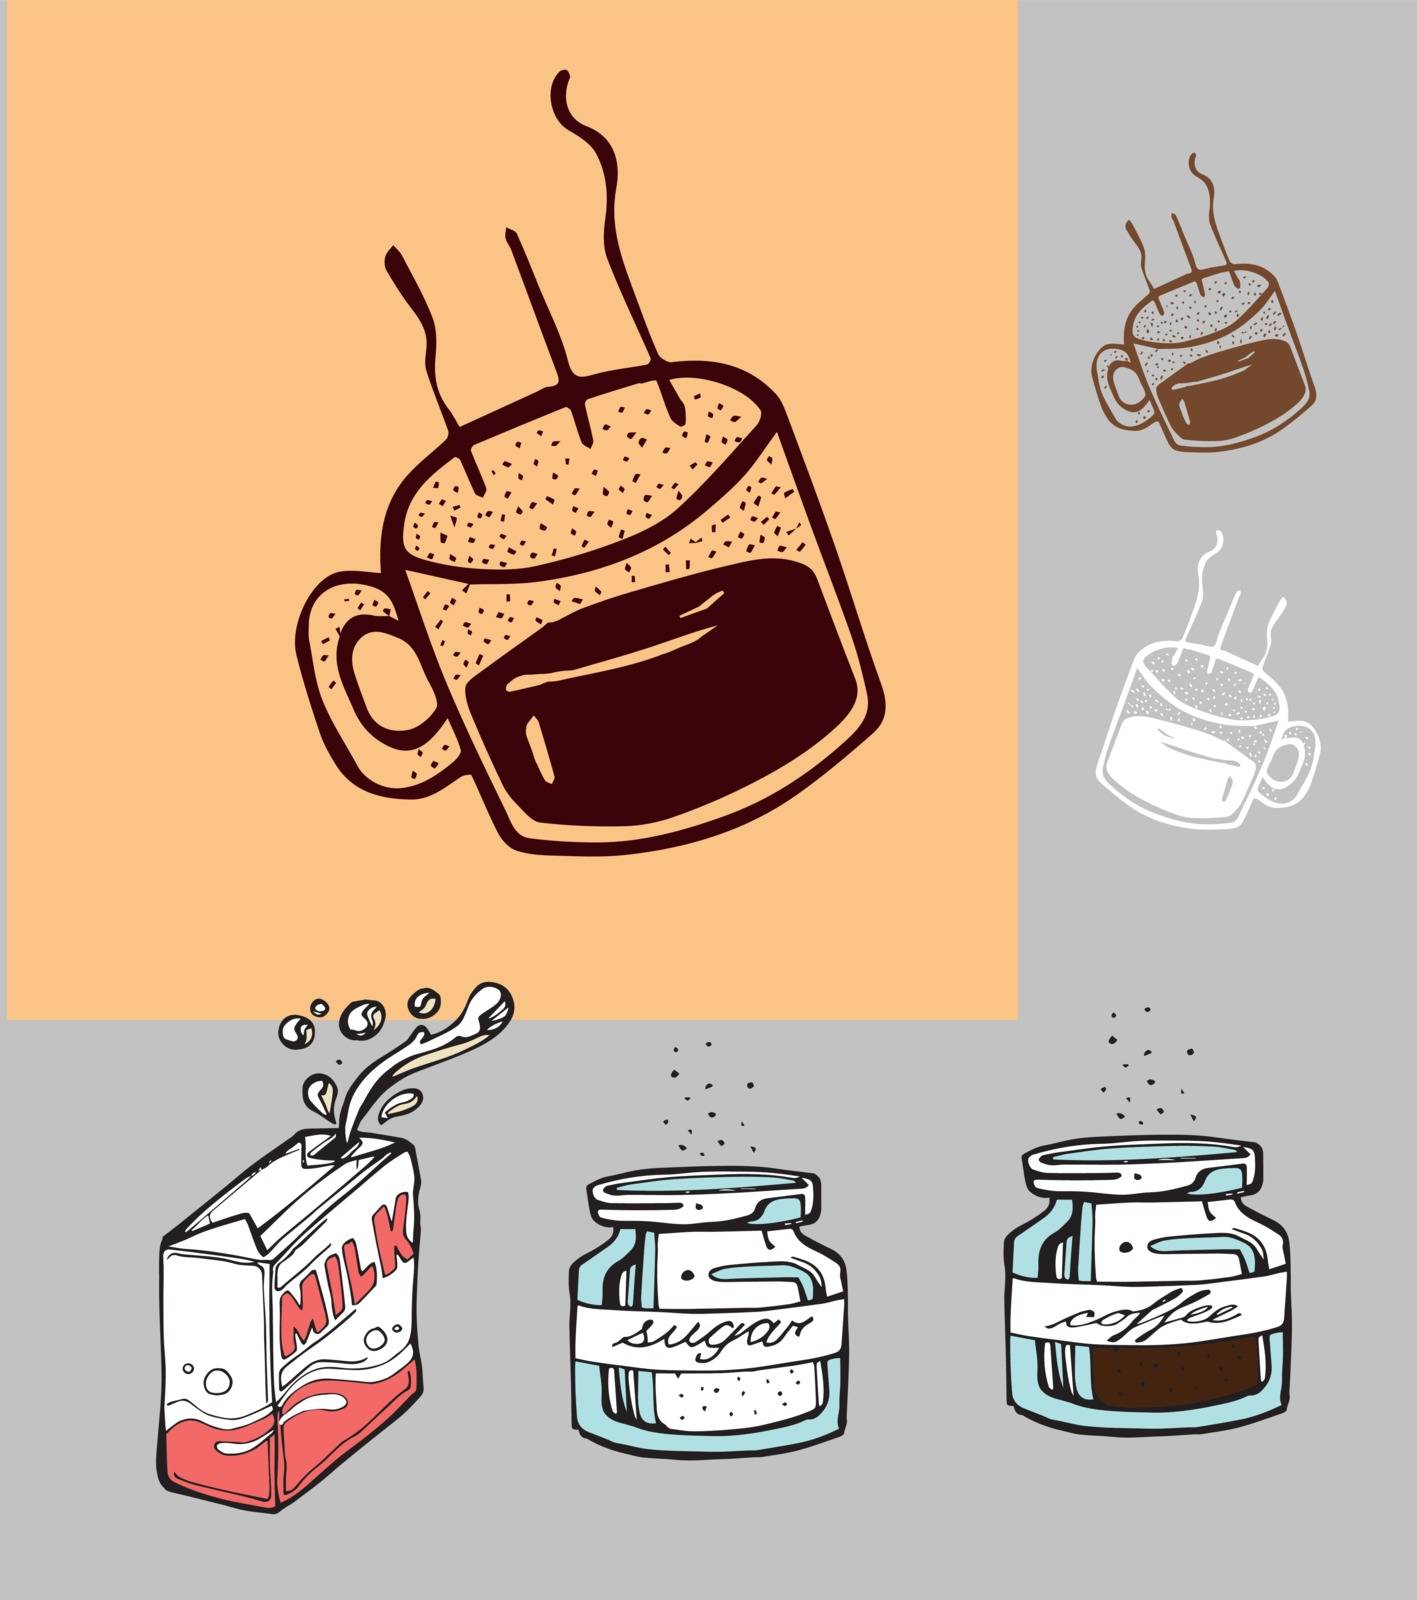 Hand drawn vector illustration or drawing of some cups, milks, sugar and coffee